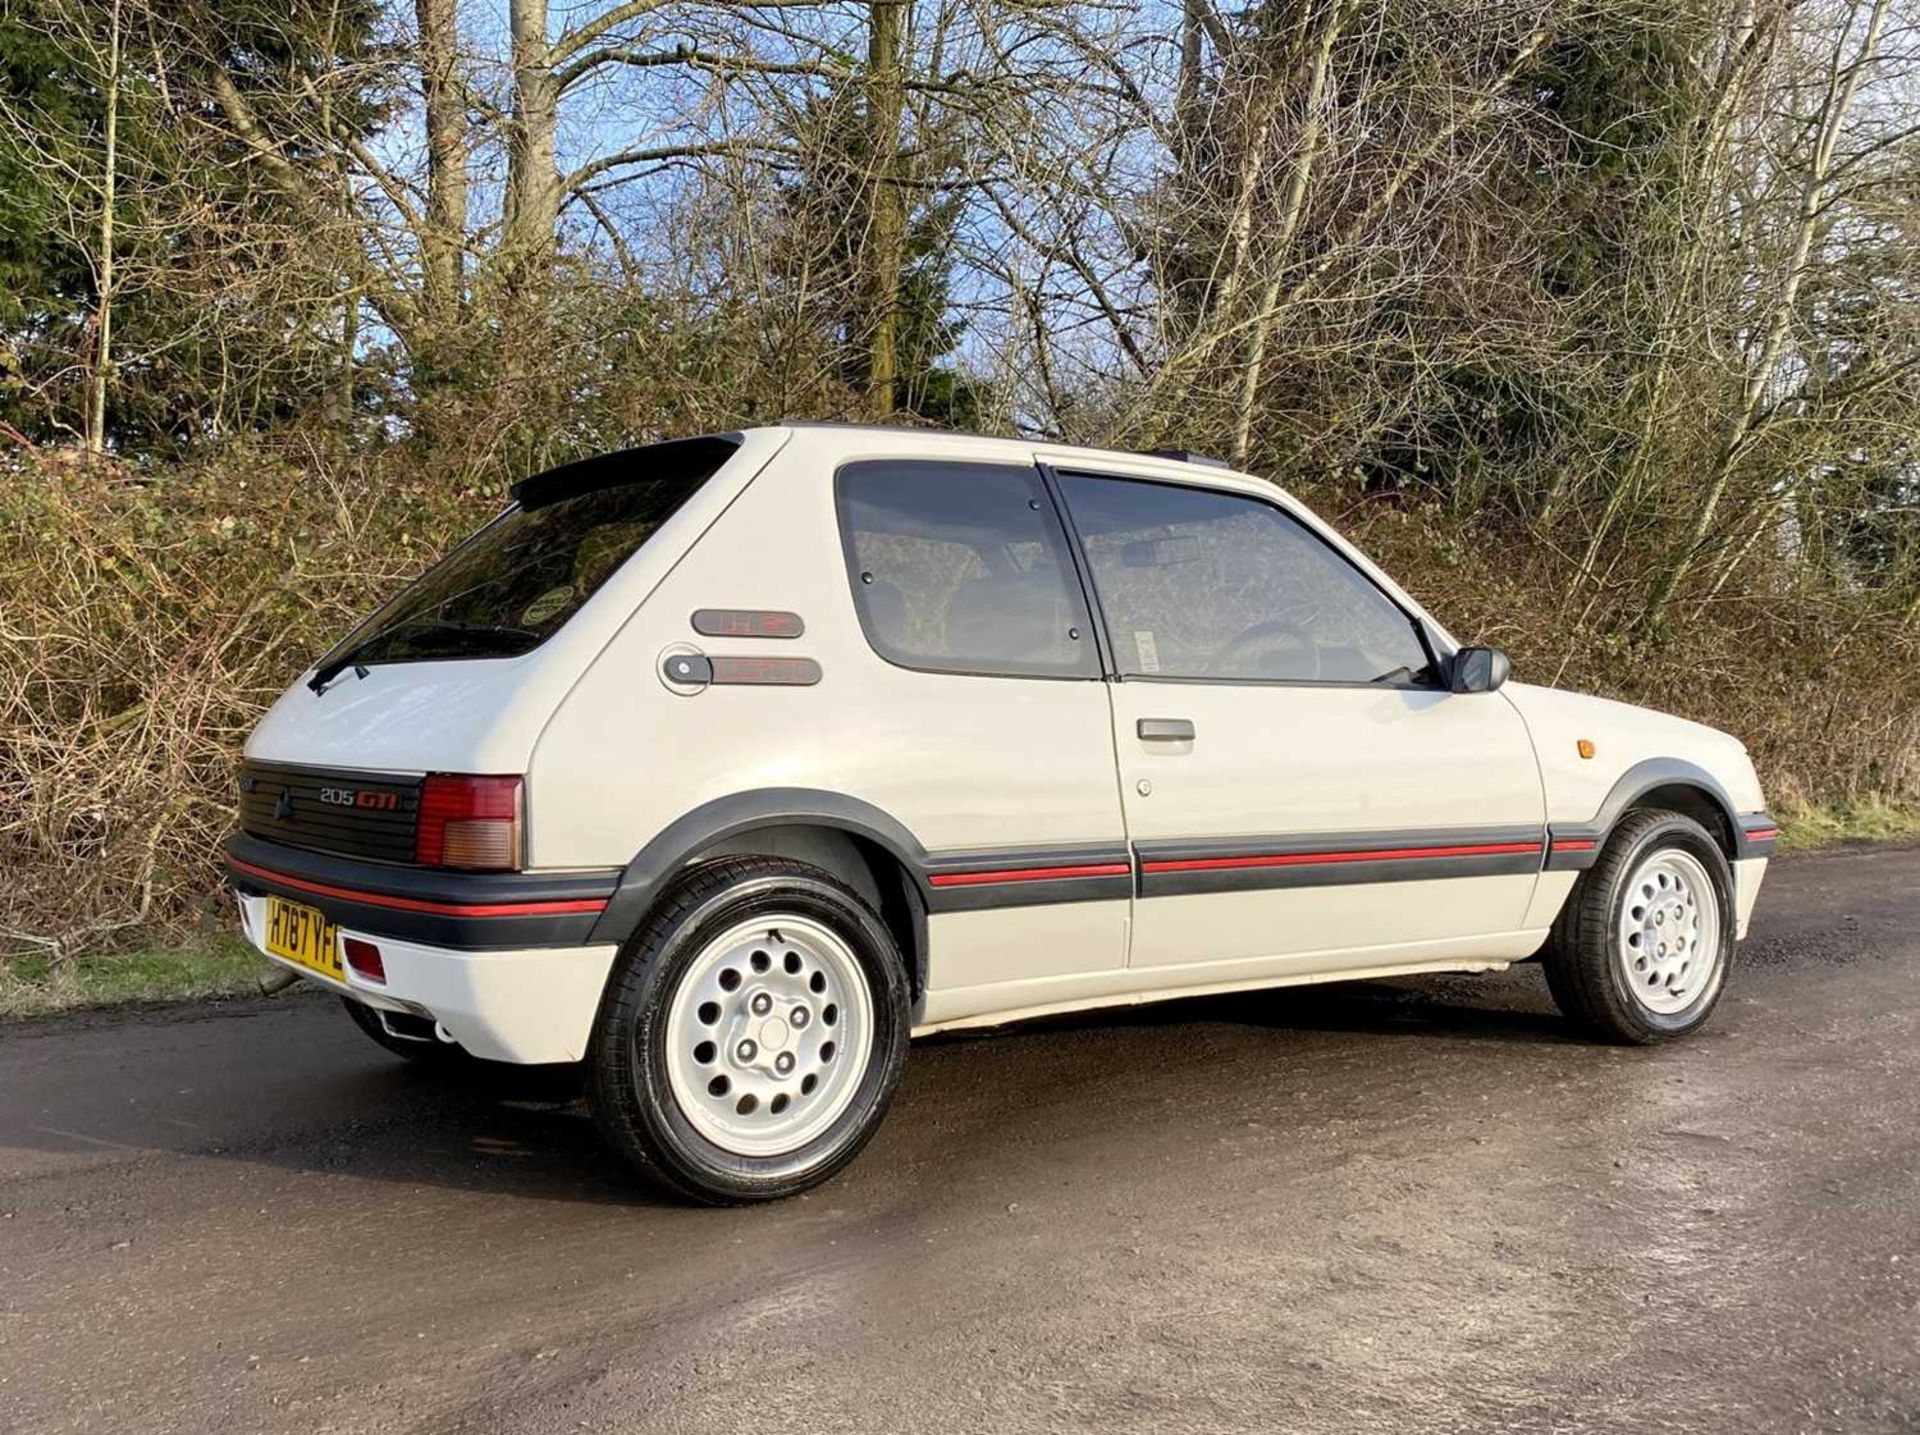 1990 Peugeot 205 GTi 1.6 Only 56,000 miles, same owner for 16 years - Image 21 of 81